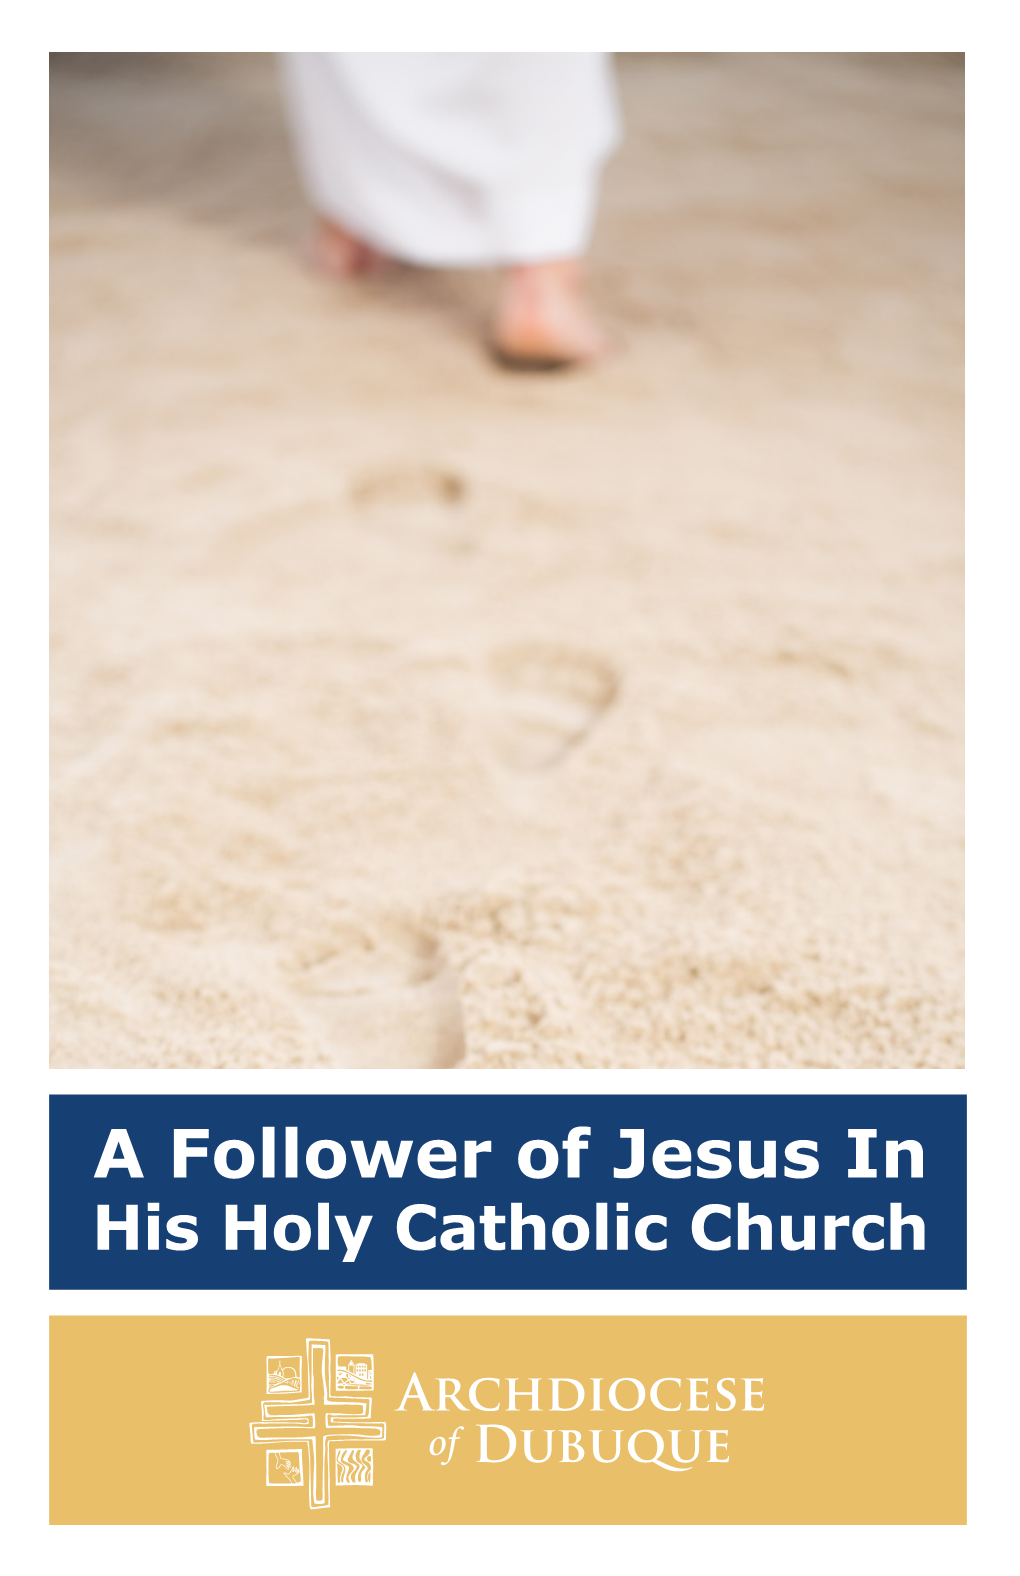 A Follower of Jesus in His Holy Catholic Church